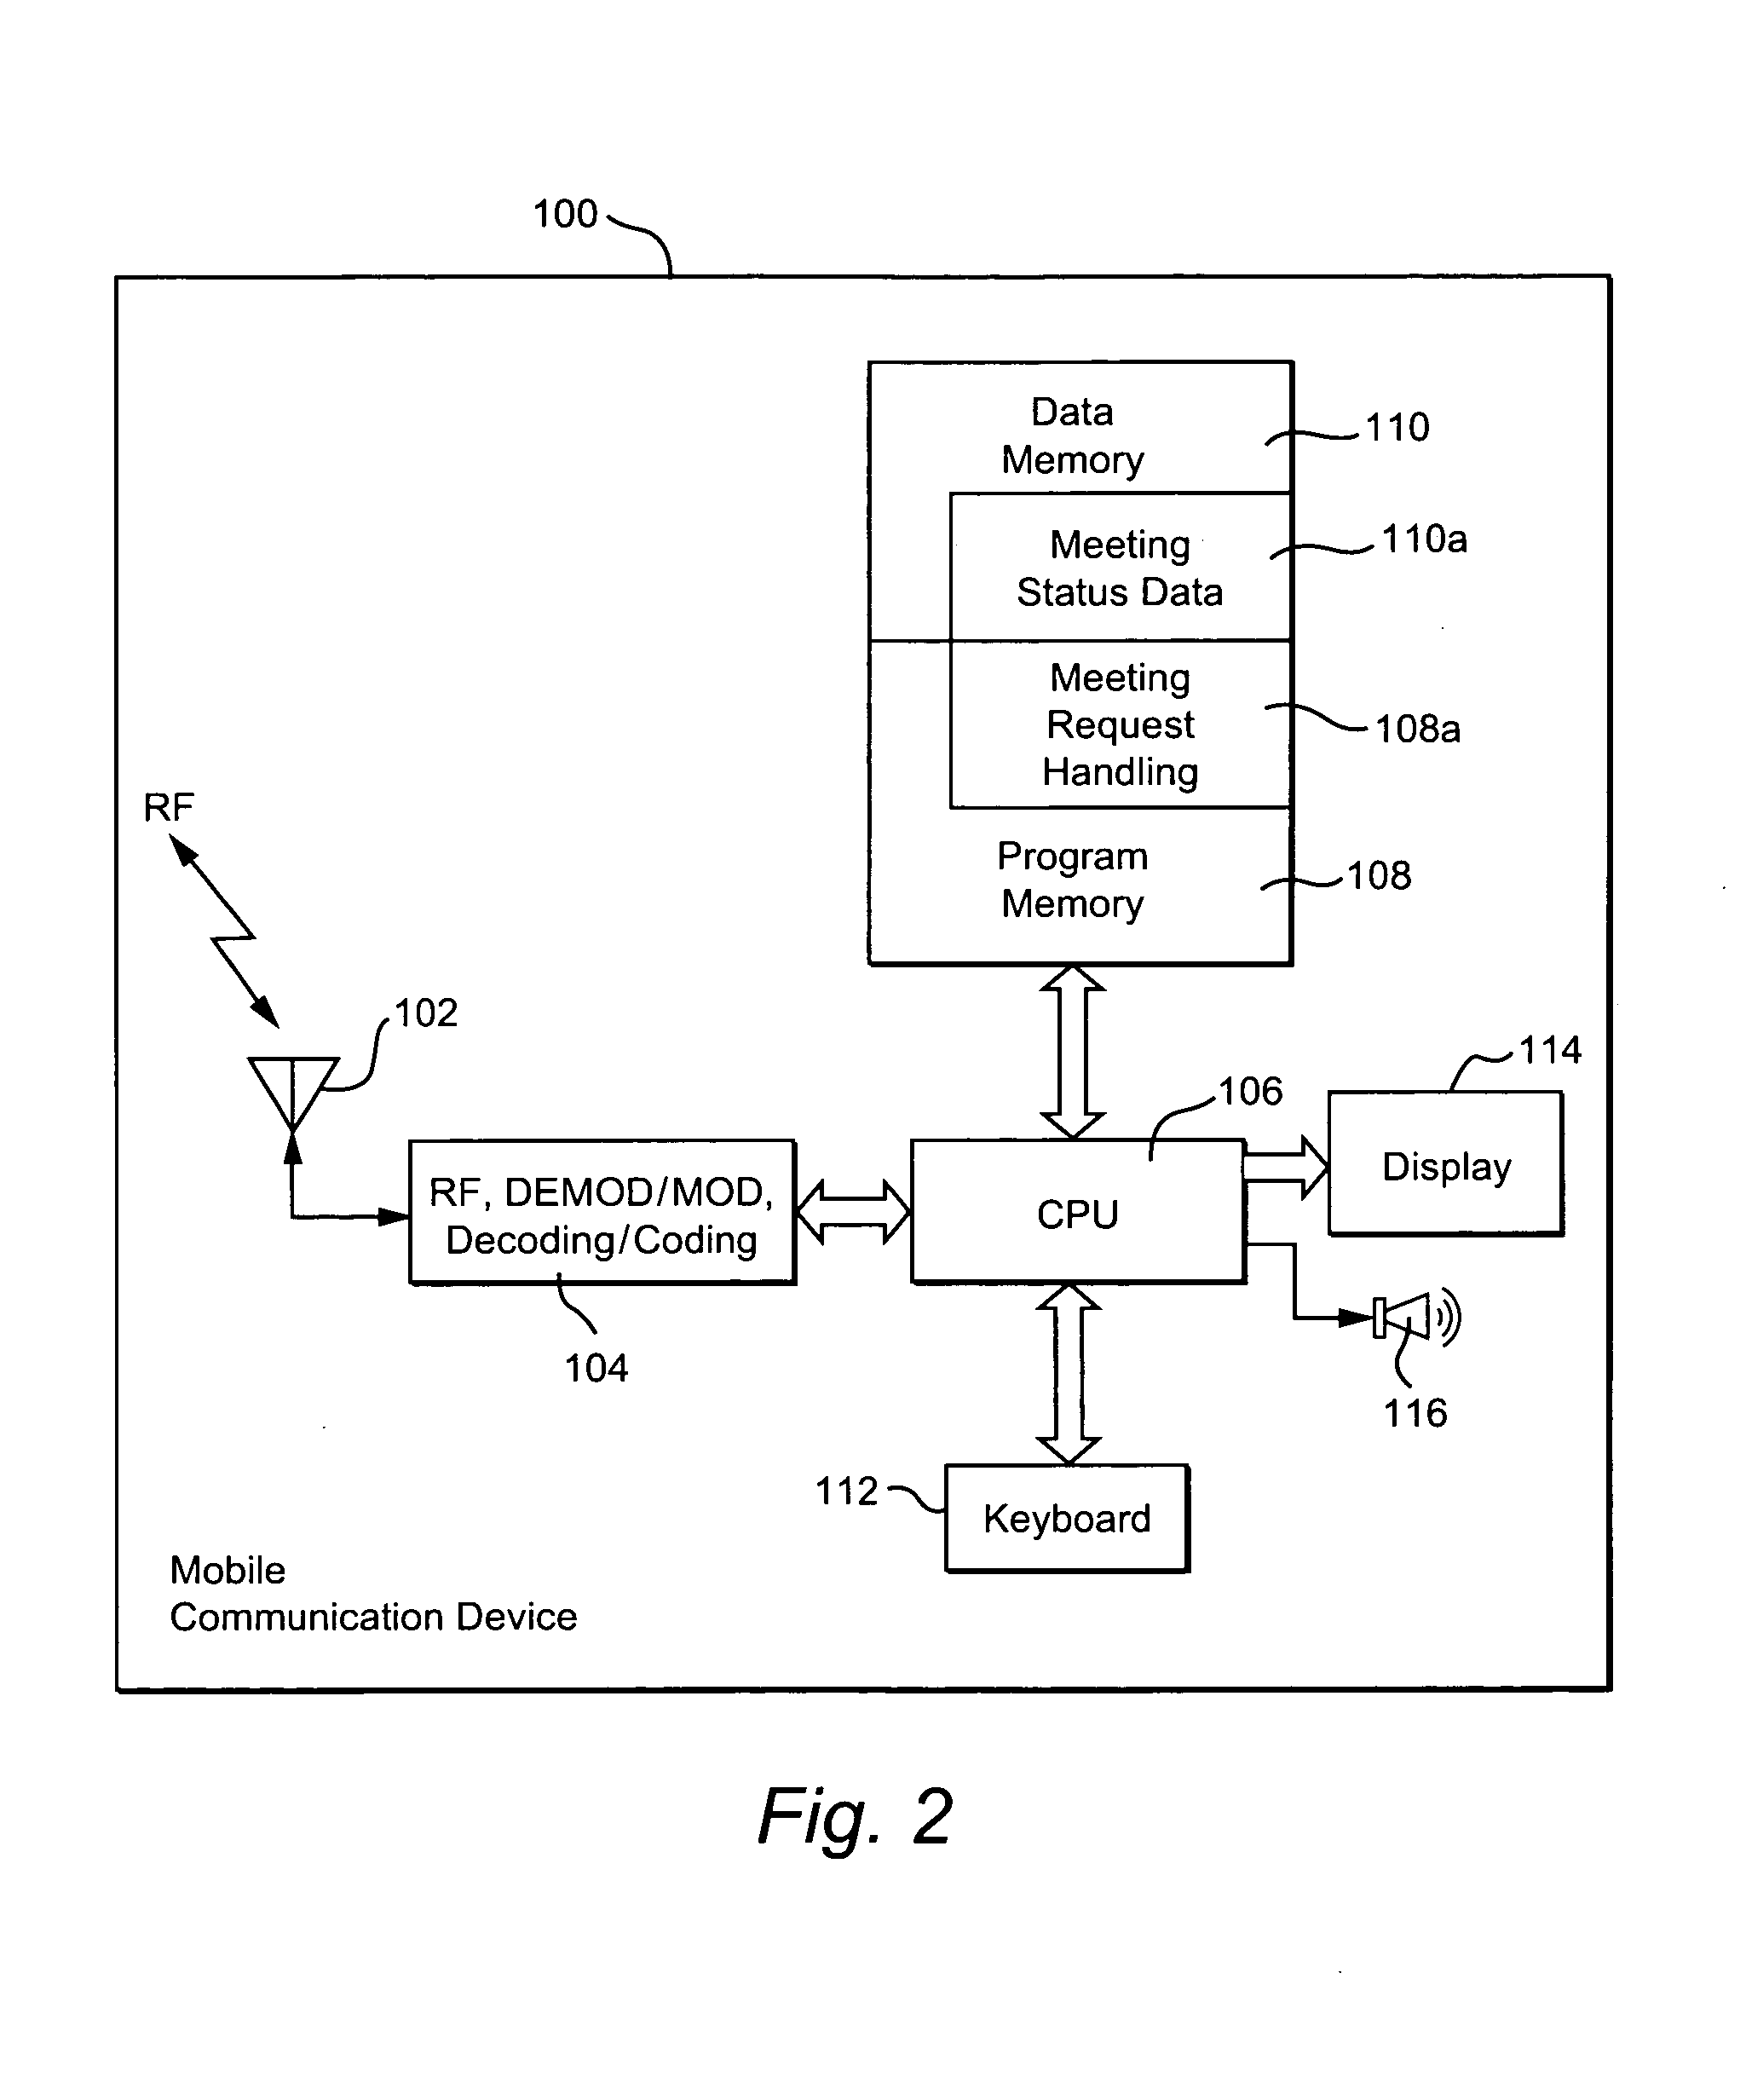 Communication device with capability for handling conditional acceptance of meeting requests